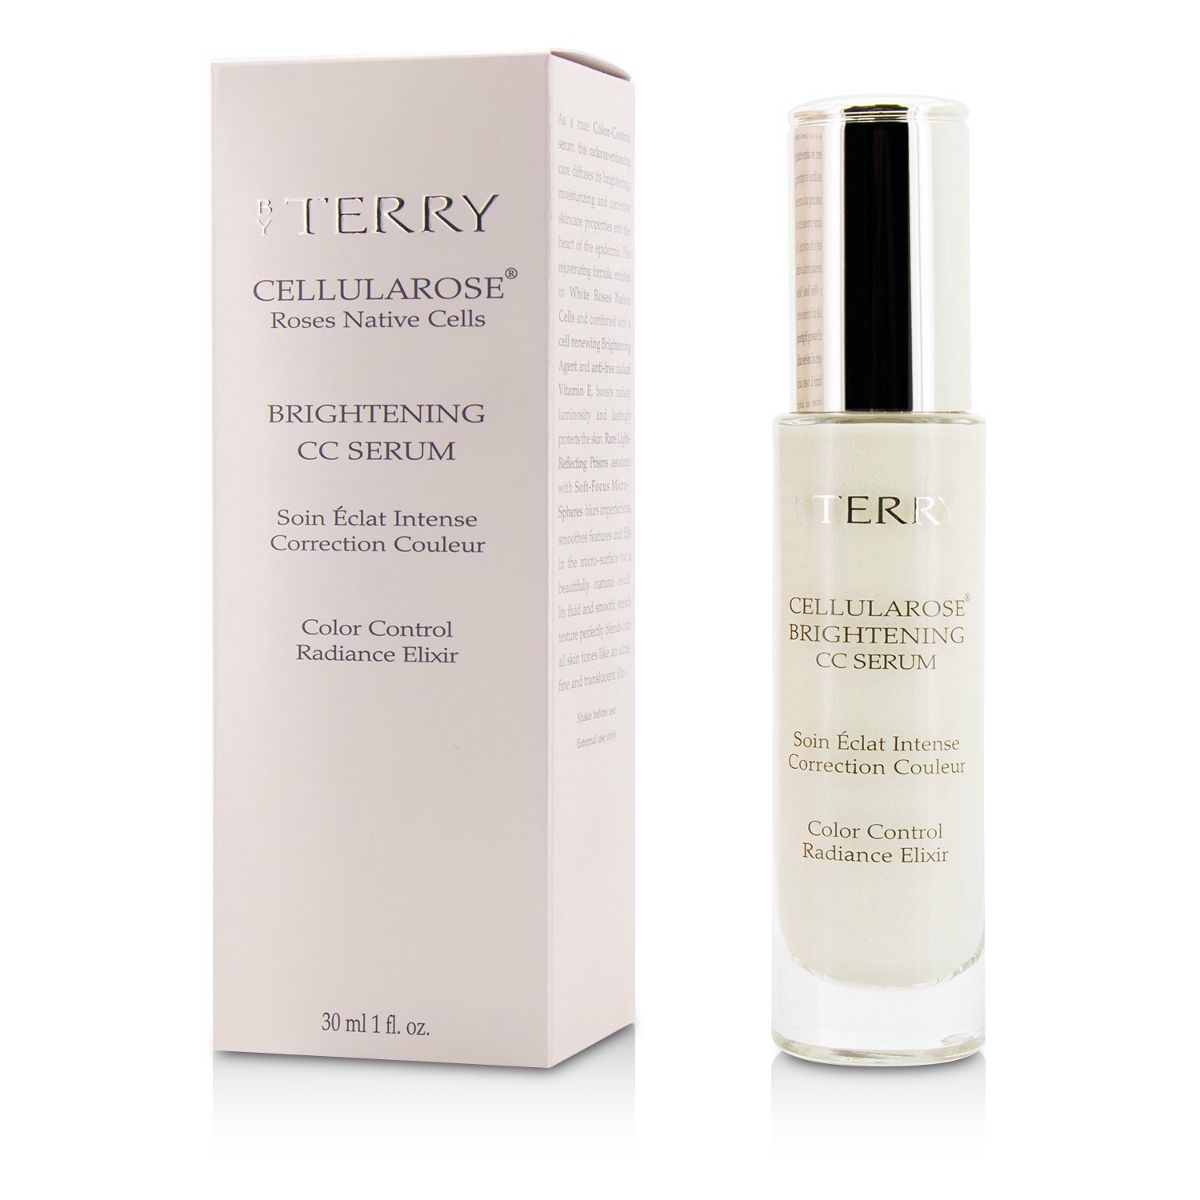 Cellularose Brightening CC Serum # 1 Immaculate Light By Terry Image